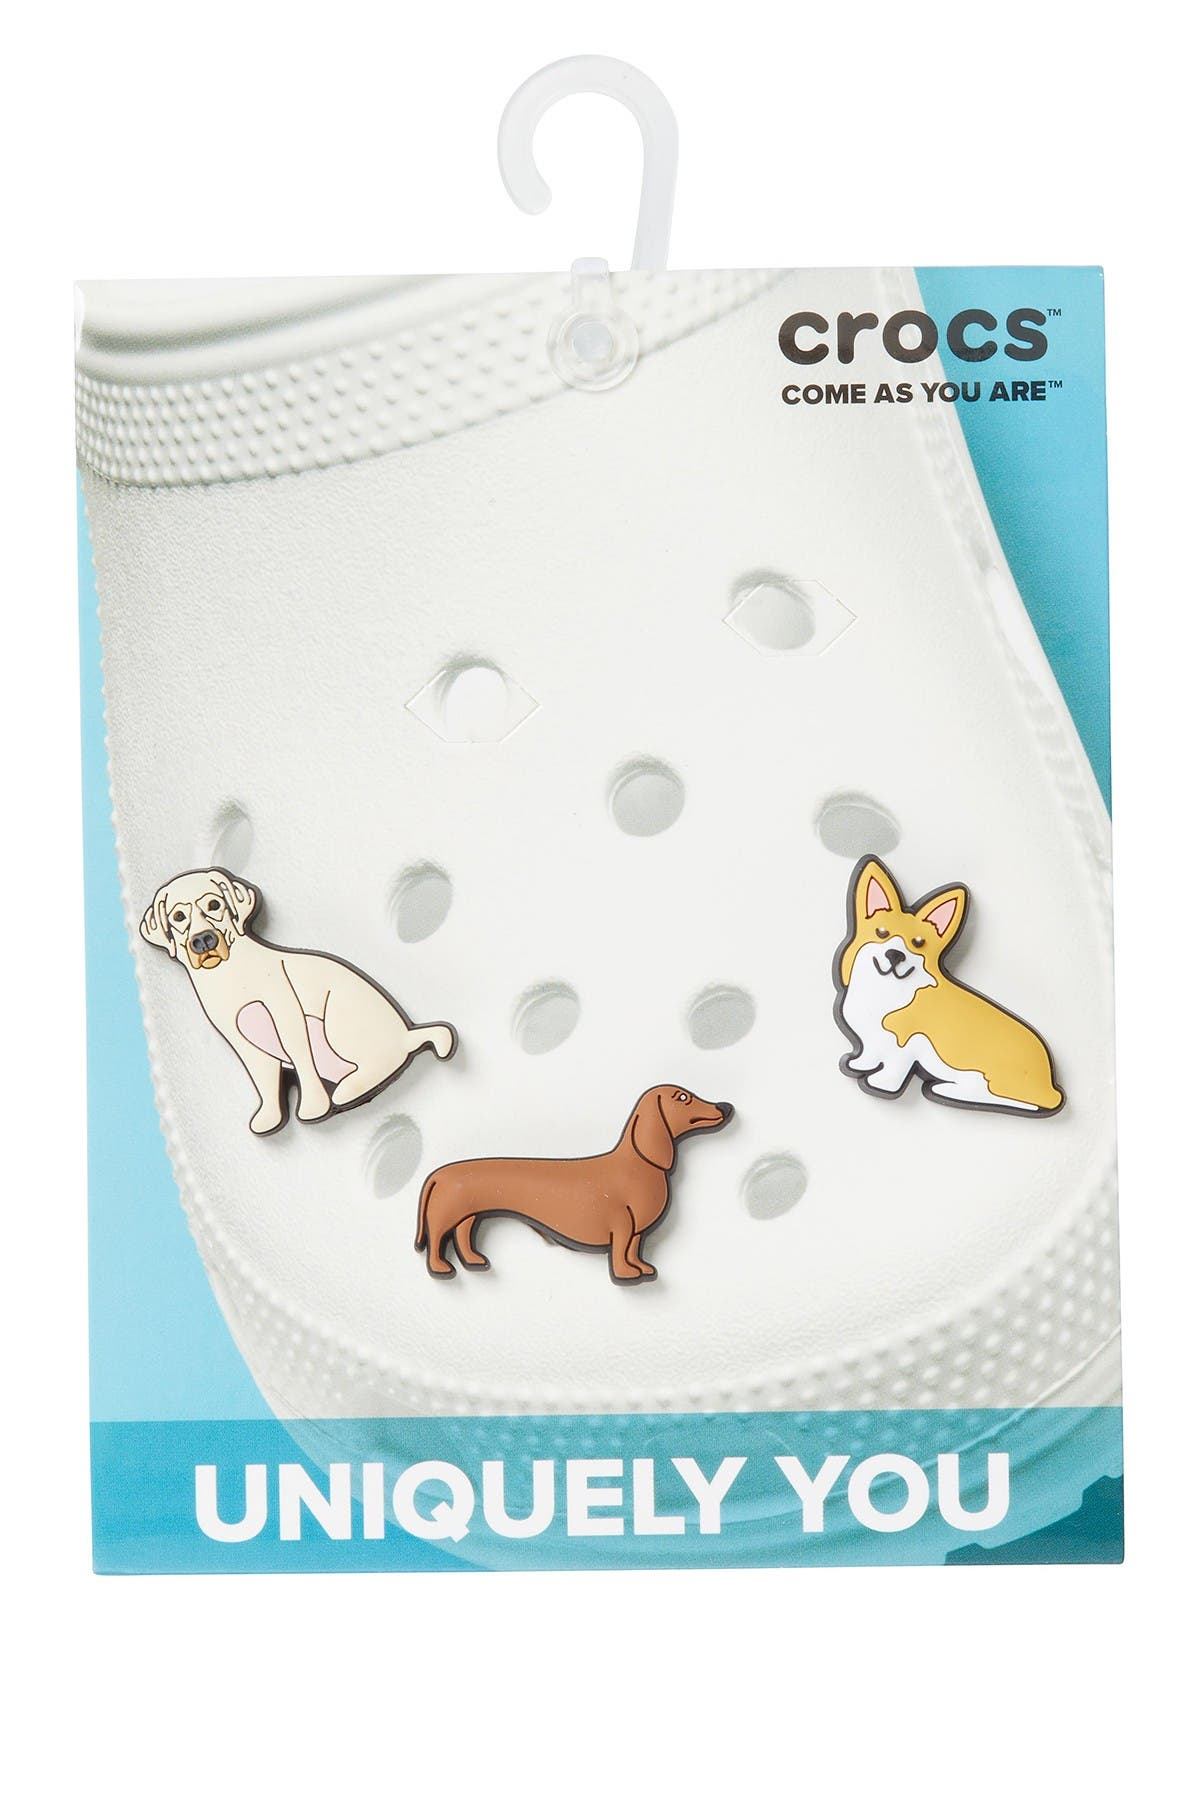 crocs for small dogs